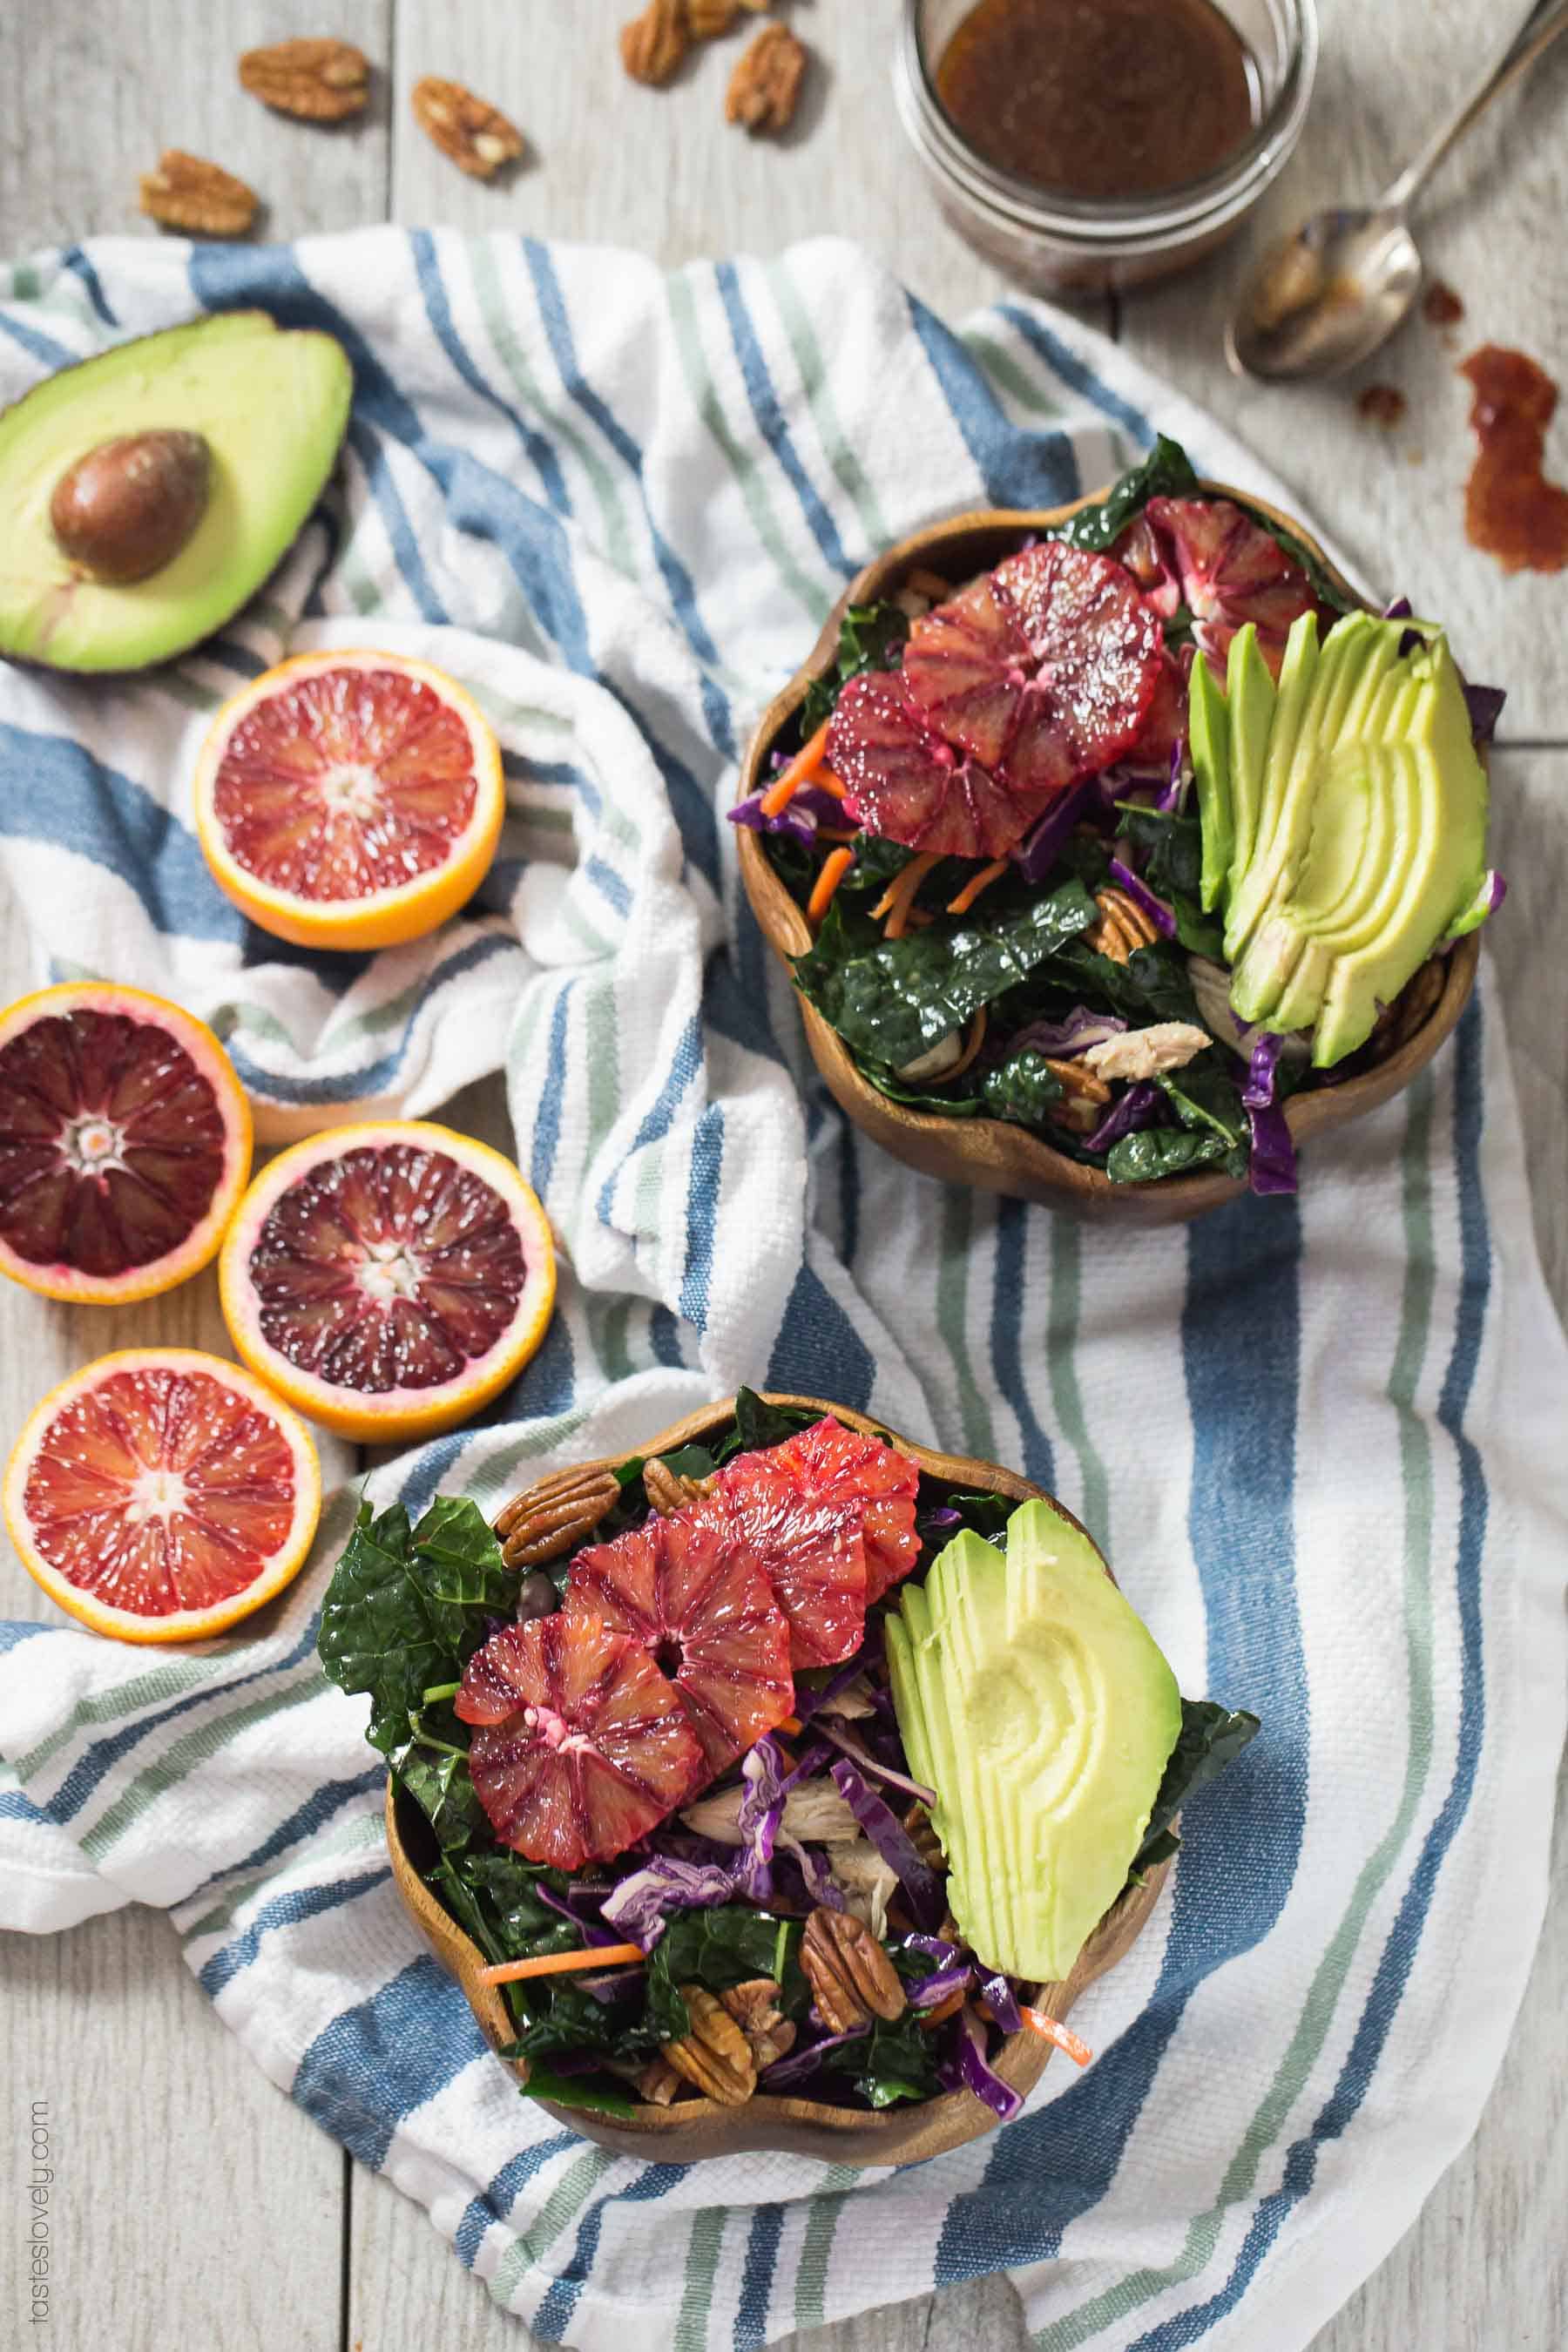 Winter Kale and Blood Orange Salad with a blood orange balsamic vinaigrette - a quick and healthy salad for lunch or dinner! (paleo, whole30, gluten free, dairy free, refined sugar free)